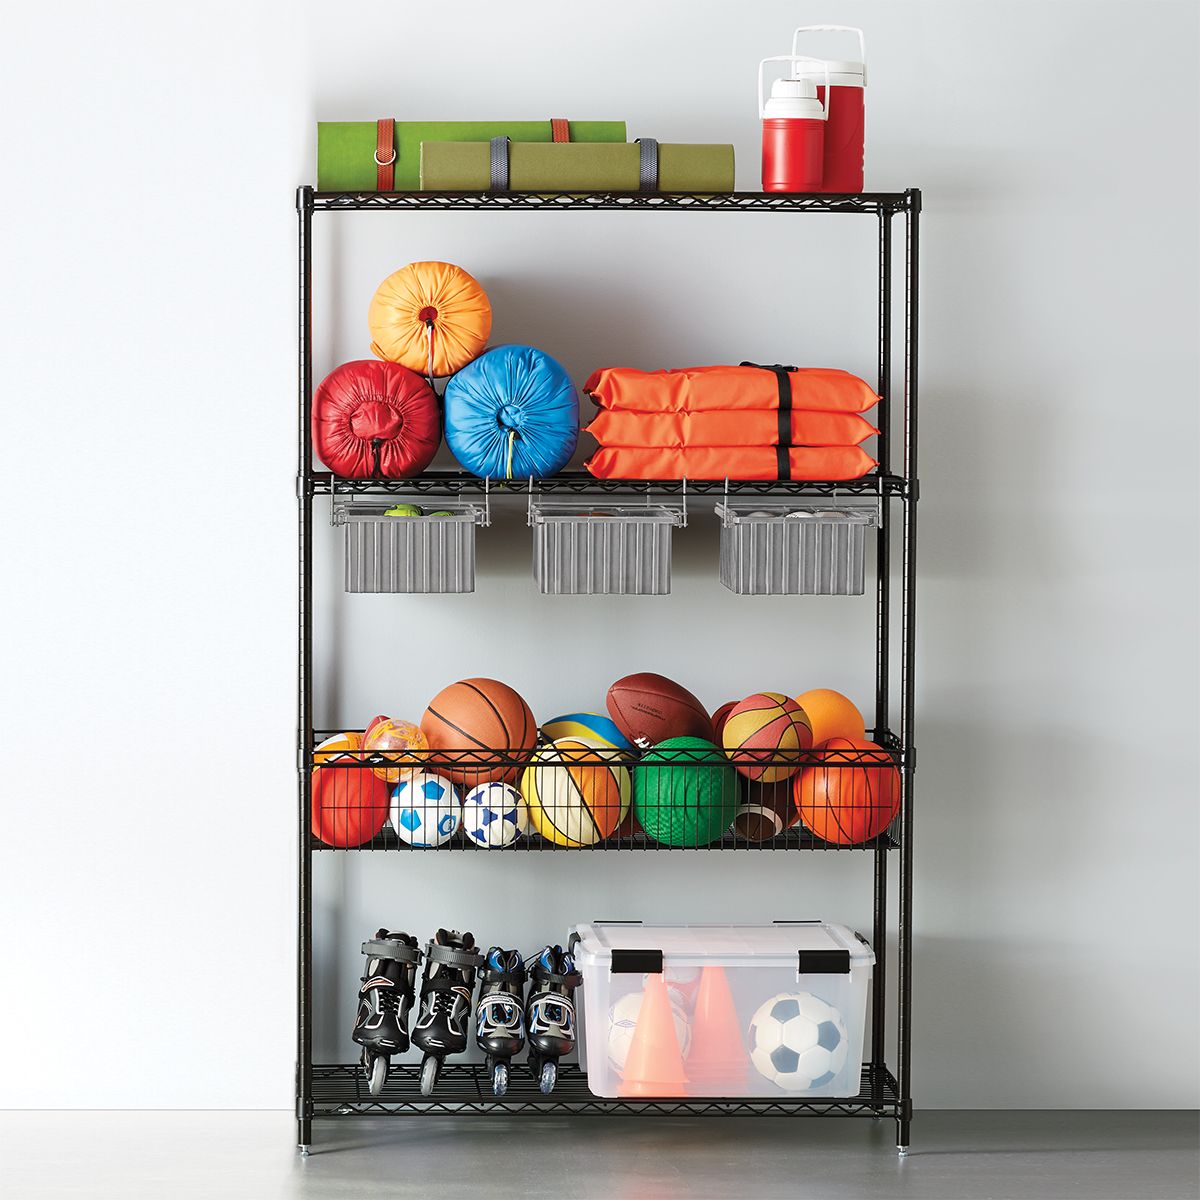 Garage Shelving w/ Drawers | The Container Store